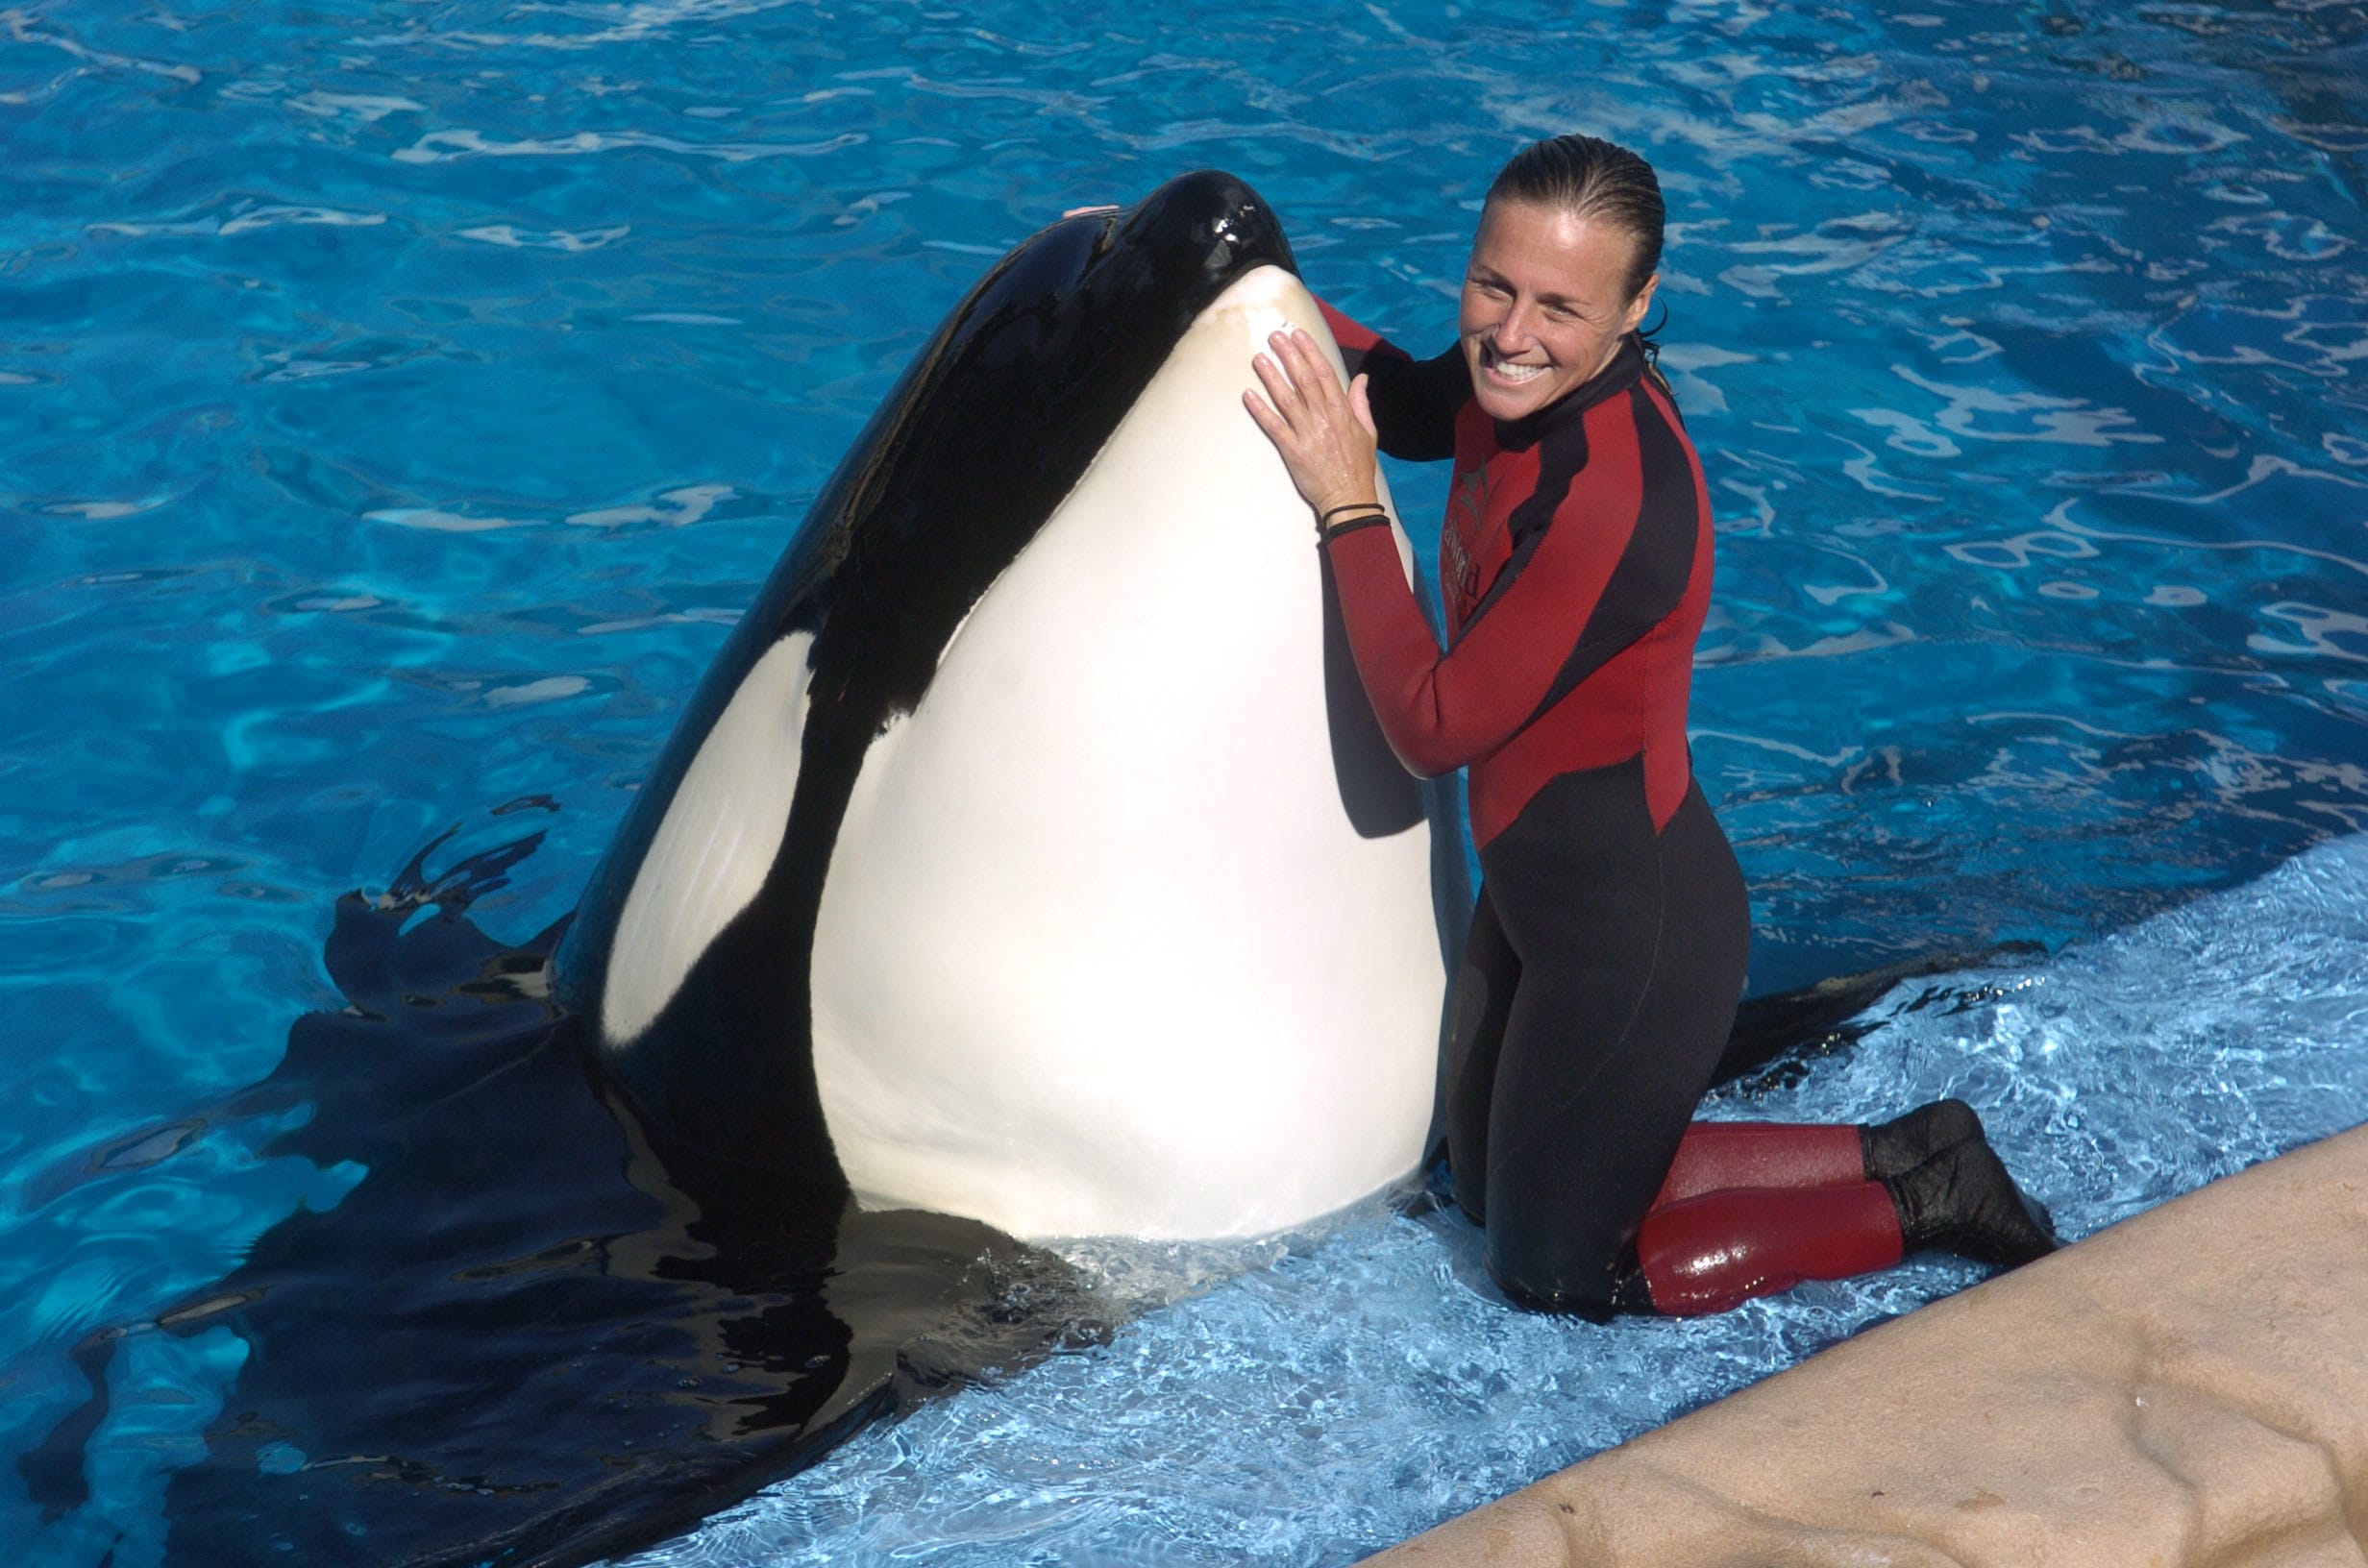 Dawn Brancheau, a whale trainer at SeaWorld Adventure Park, poses while performing. Brancheau was killed in an accident with a killer whale at the SeaWorld Shamu Stadium on Feb. 24, 2010. Despite the lingering controversy over Brancheau's death and the issue of keeping orcas in captivity, SeaWorld is going to nearly double the size of its orca environment at its park in San Diego, officials announced Friday, Aug.